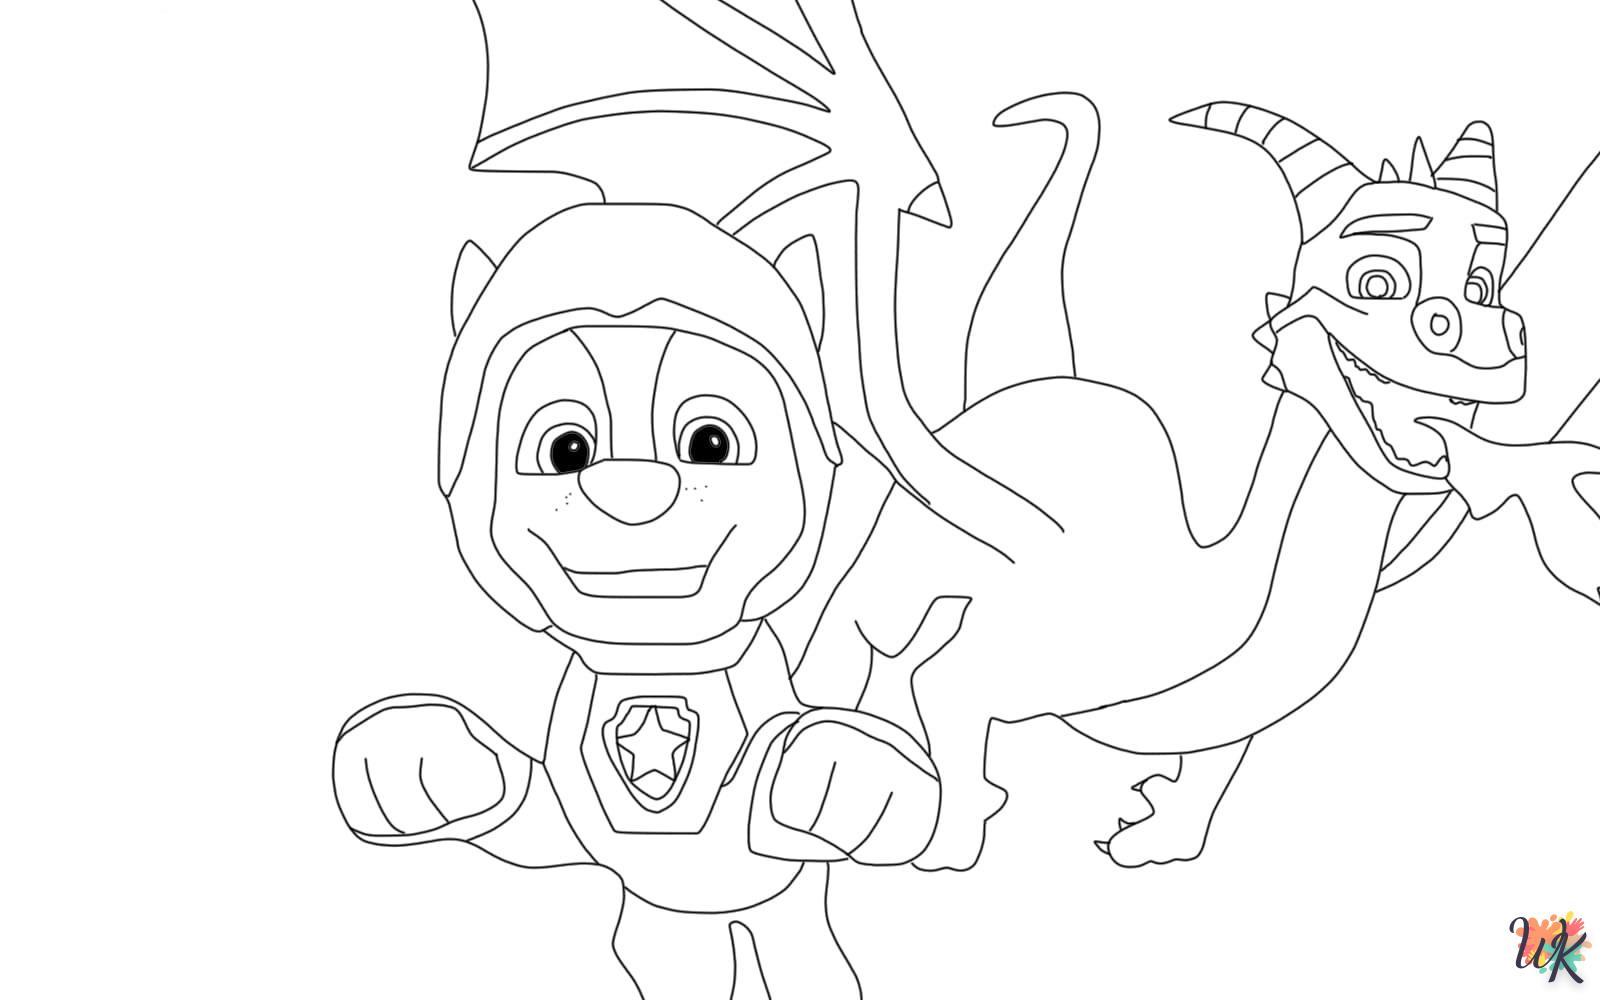 Paw Patrol coloring page to print for free